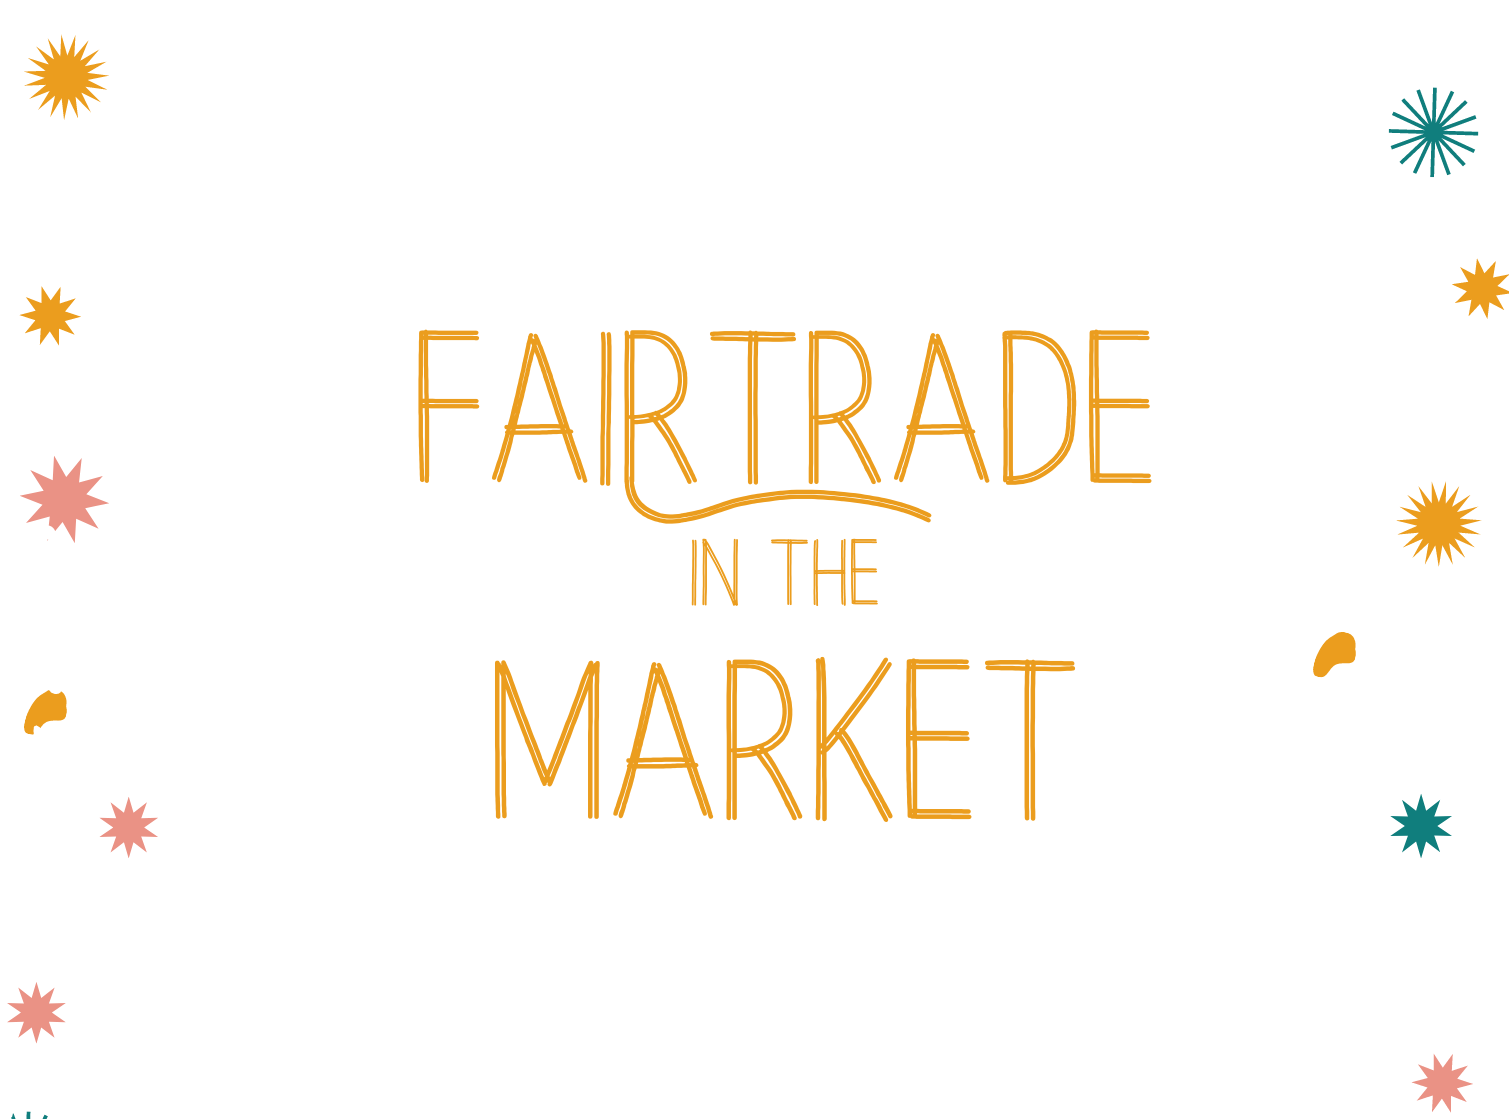 Fairtrade in the Market is Open!